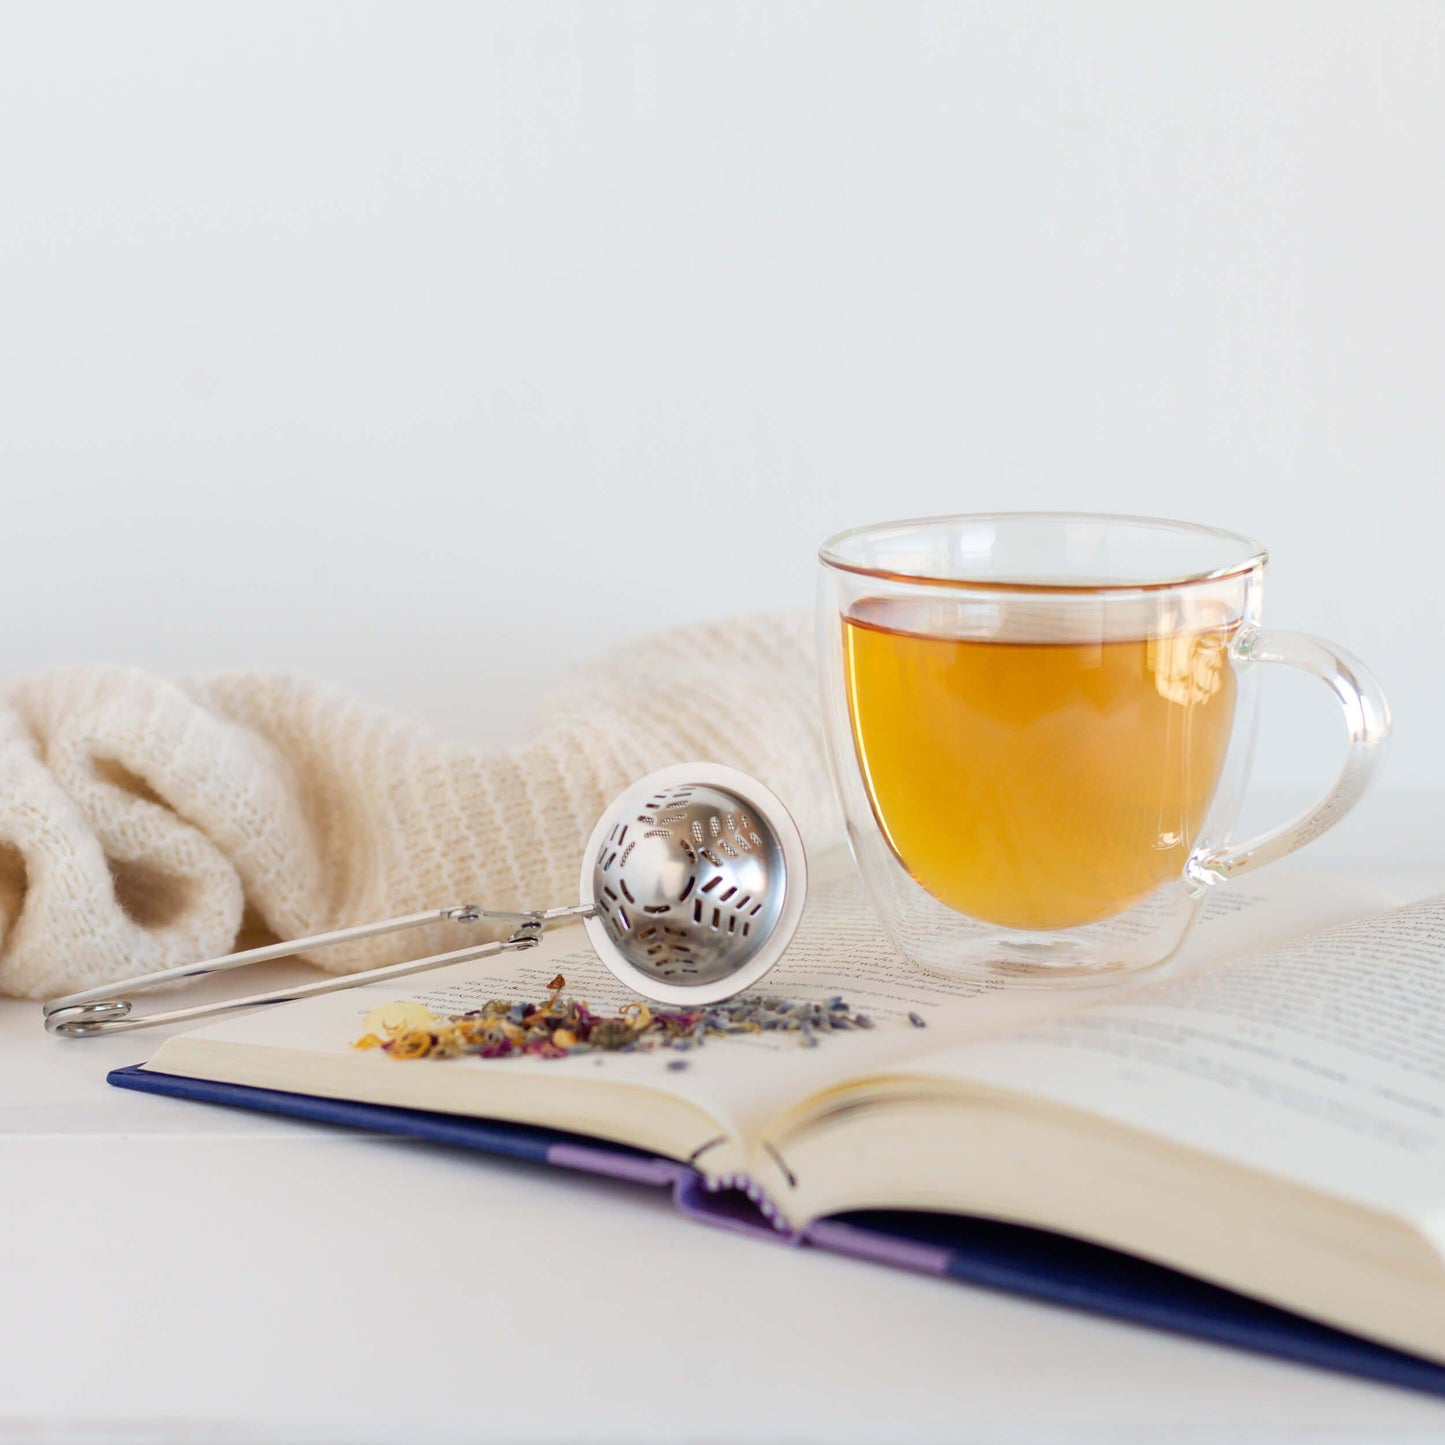 Lavender Lullaby Organic Herbal Tea shown as brewed tea in a glass mug displayed on an open book with a teaball, loose lavender blossoms, and a white knitted blanket in the background